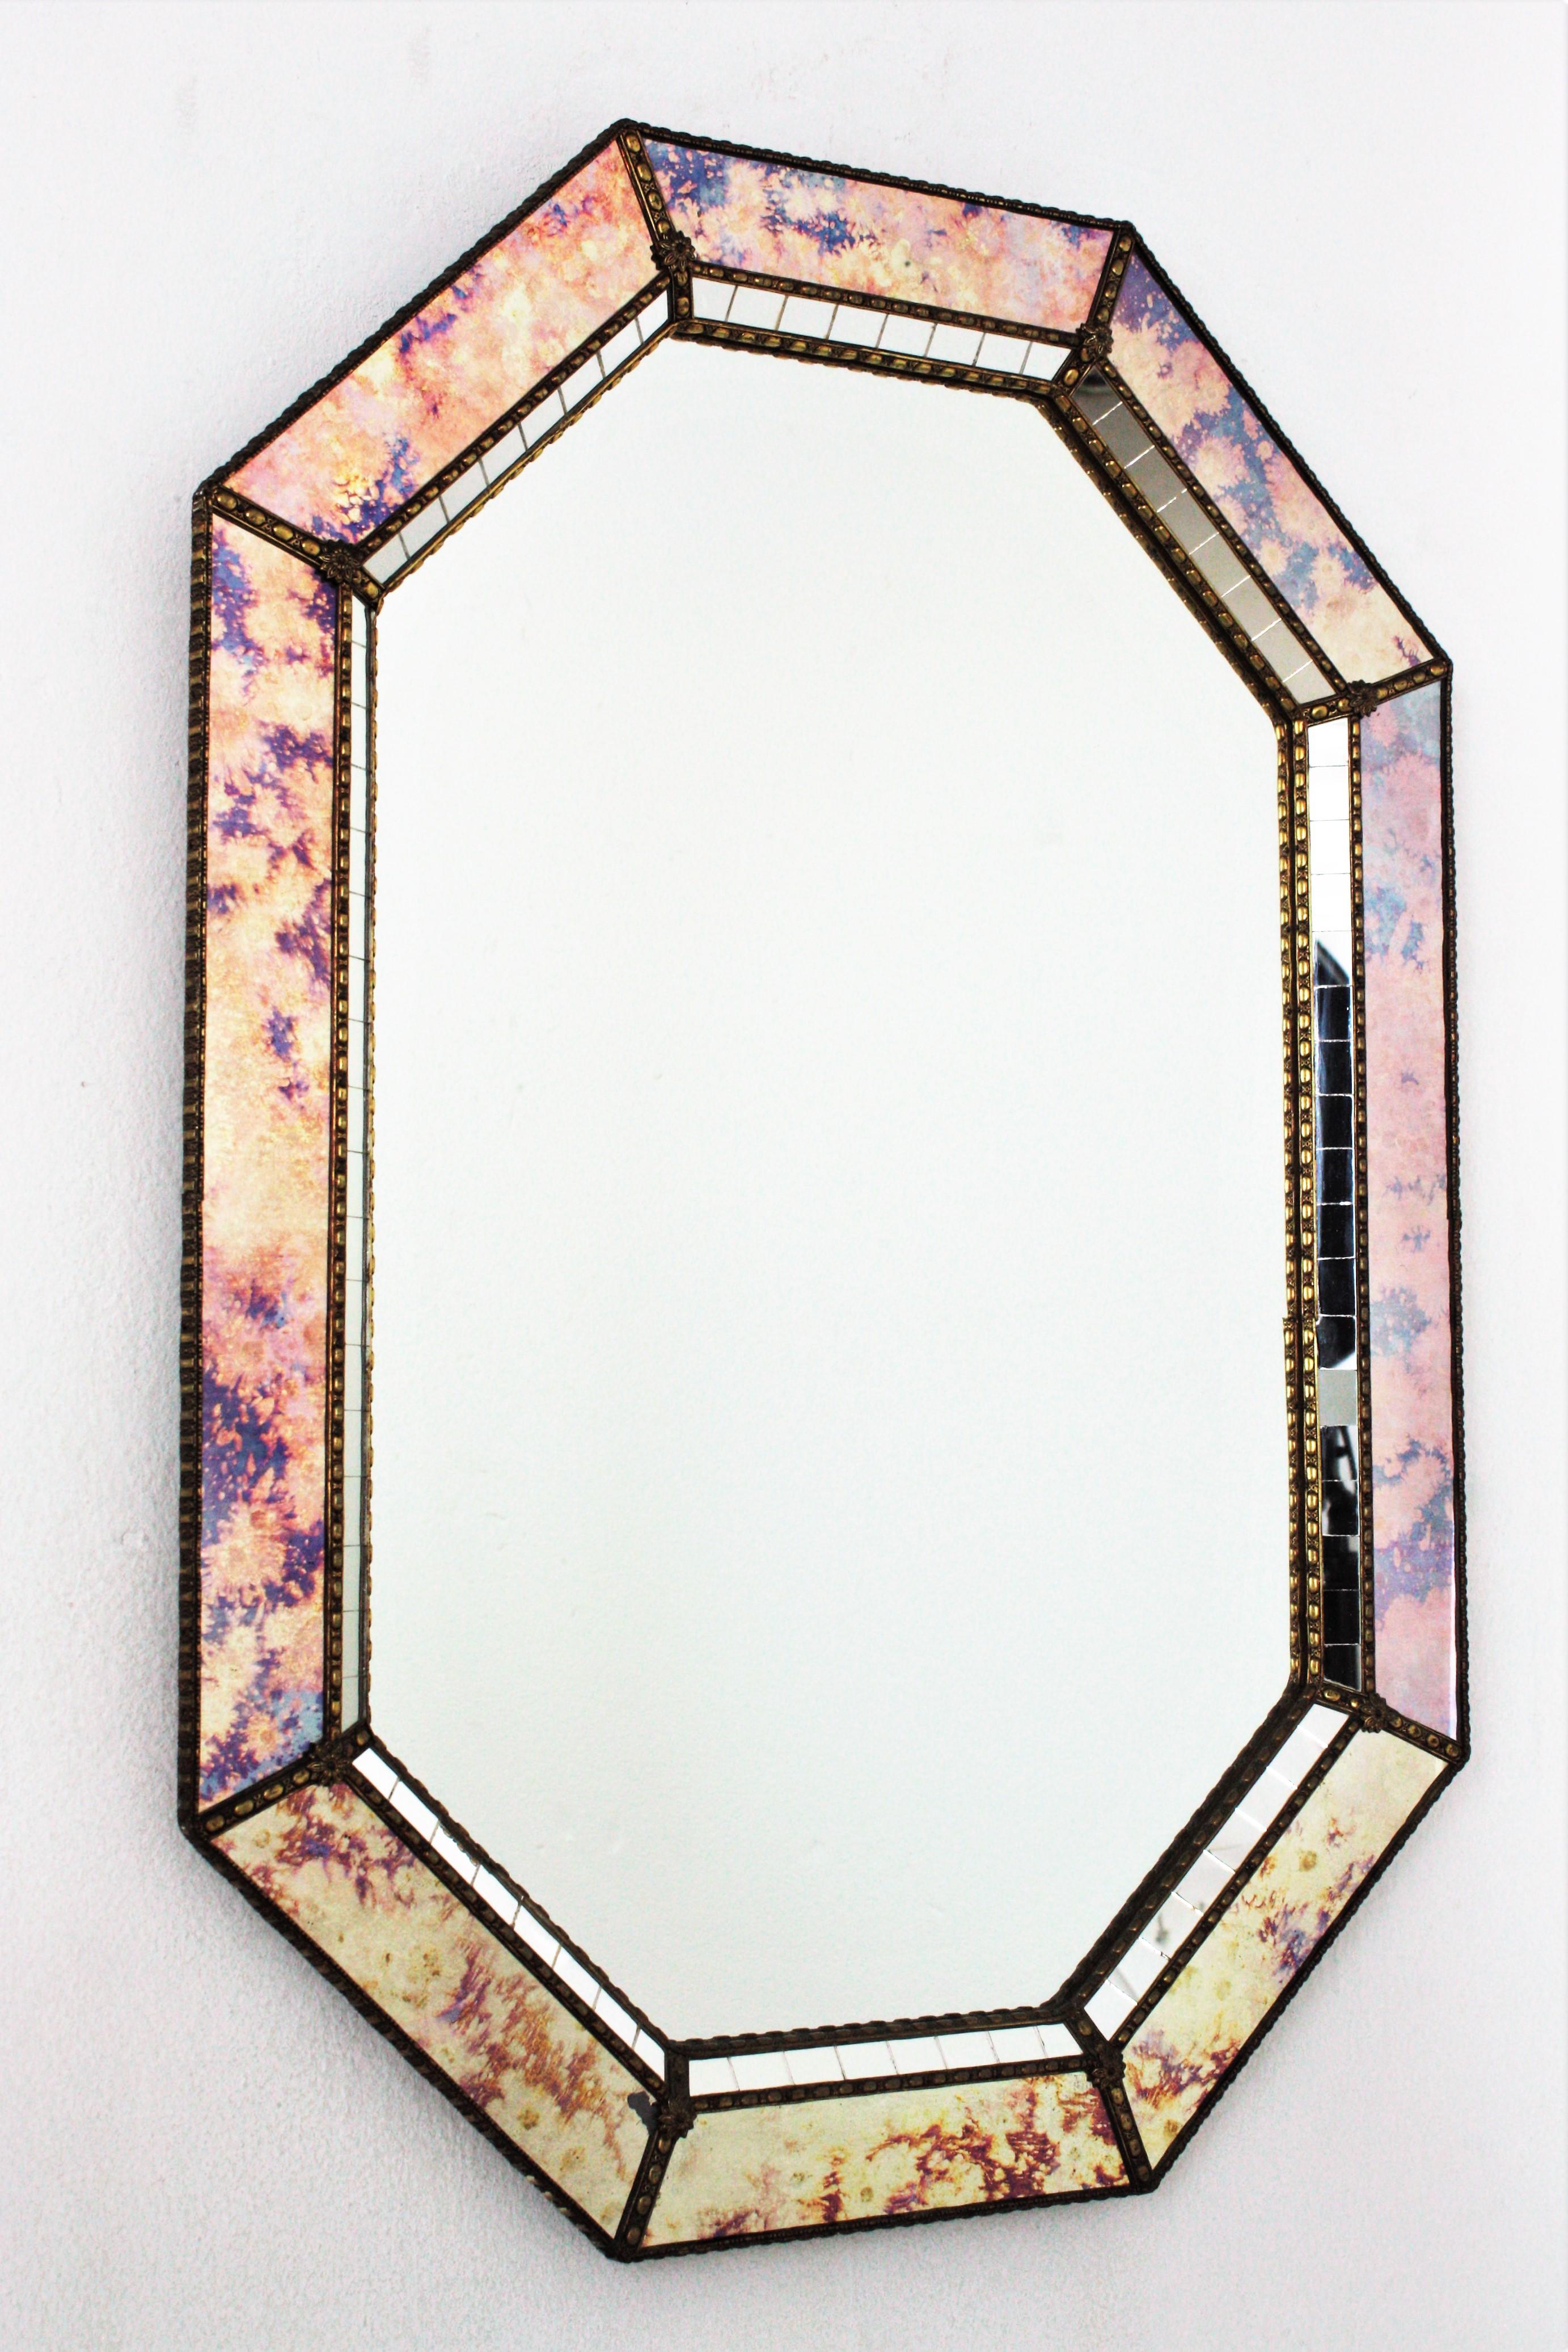 Hollywood Regency Octagonal Venetian Style Mirror with Iridiscent Glasses and Brass Details